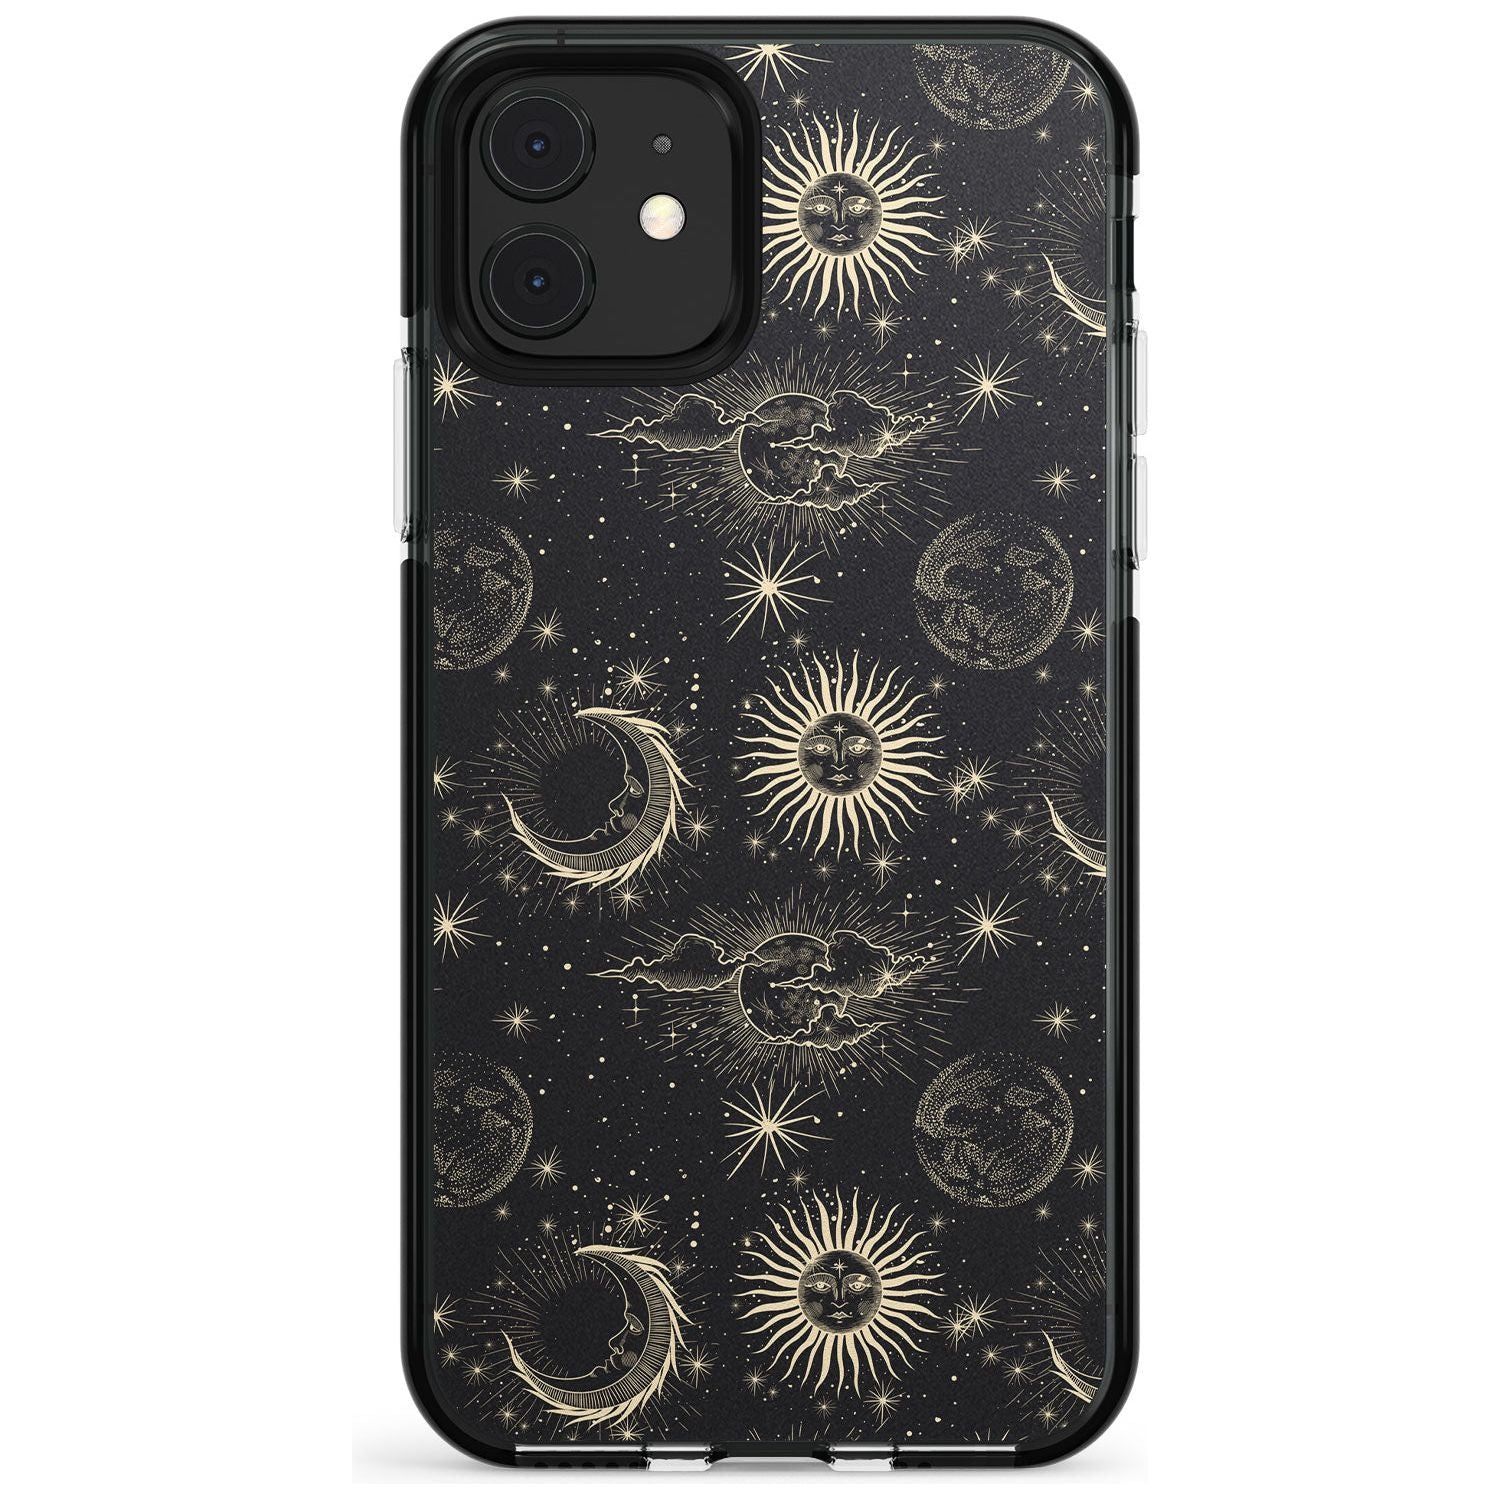 Large Suns, Moons & Clouds Pink Fade Impact Phone Case for iPhone 11 Pro Max